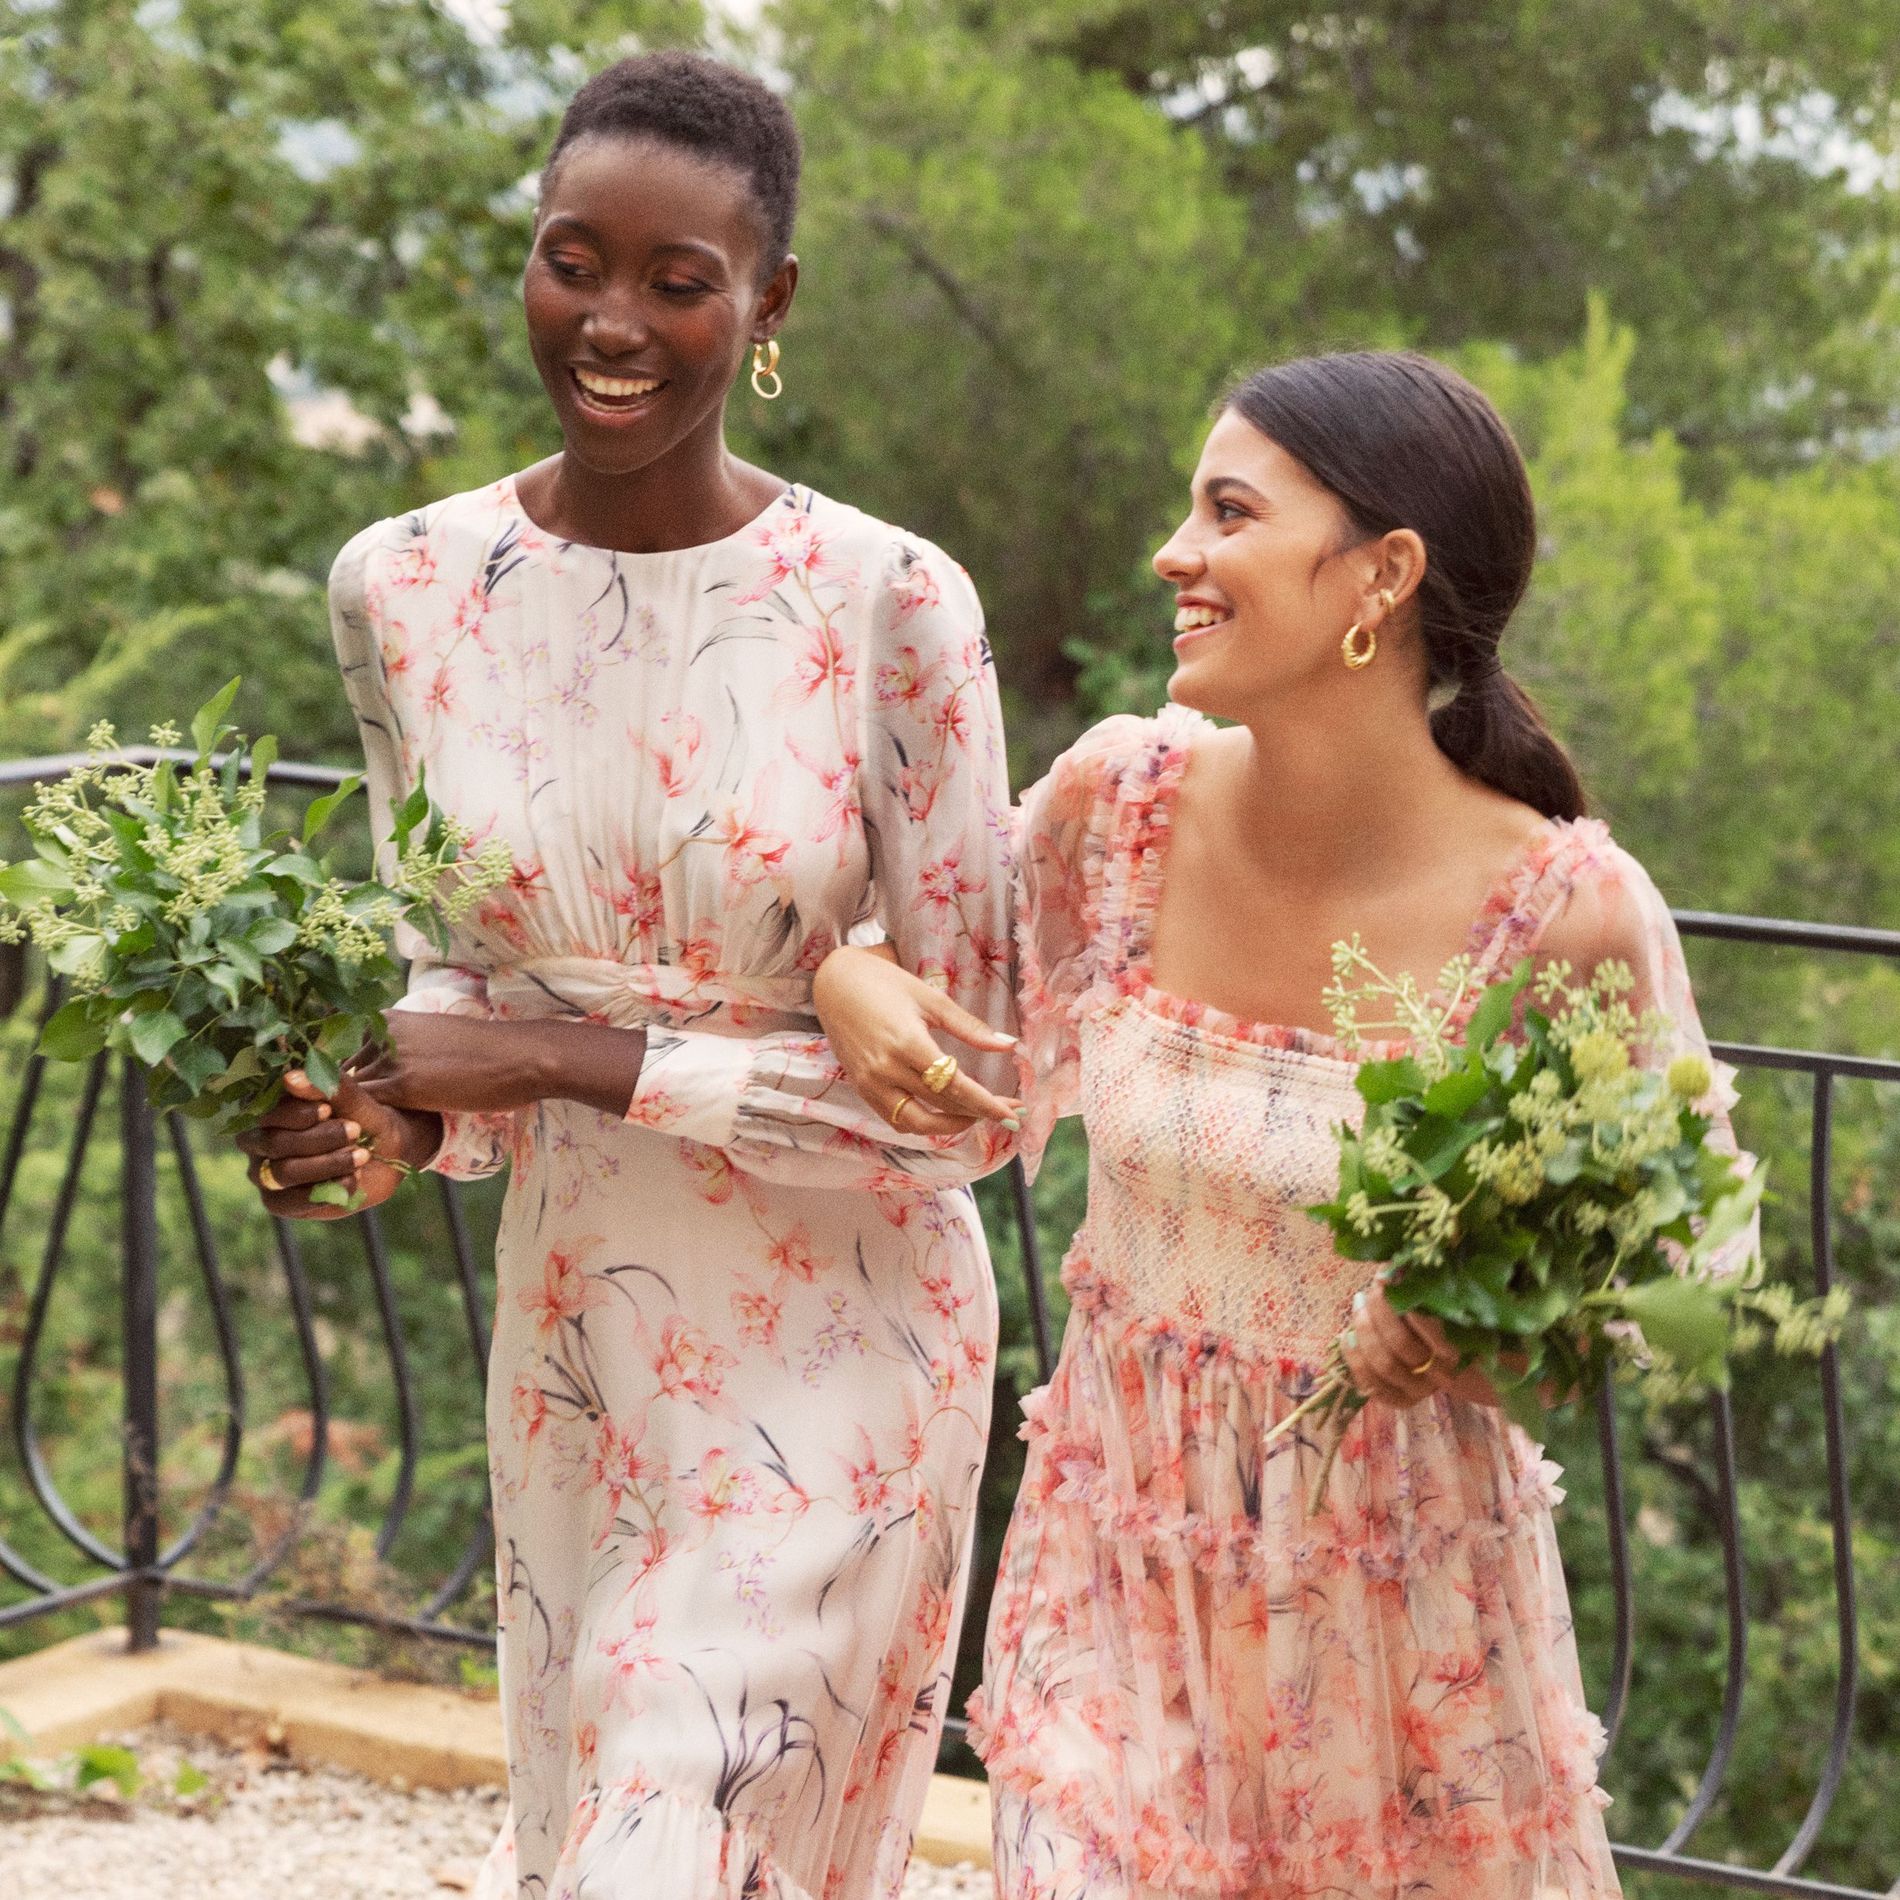 The Best Wedding Guest Dresses For Women Over 50 Nina, 54% OFF